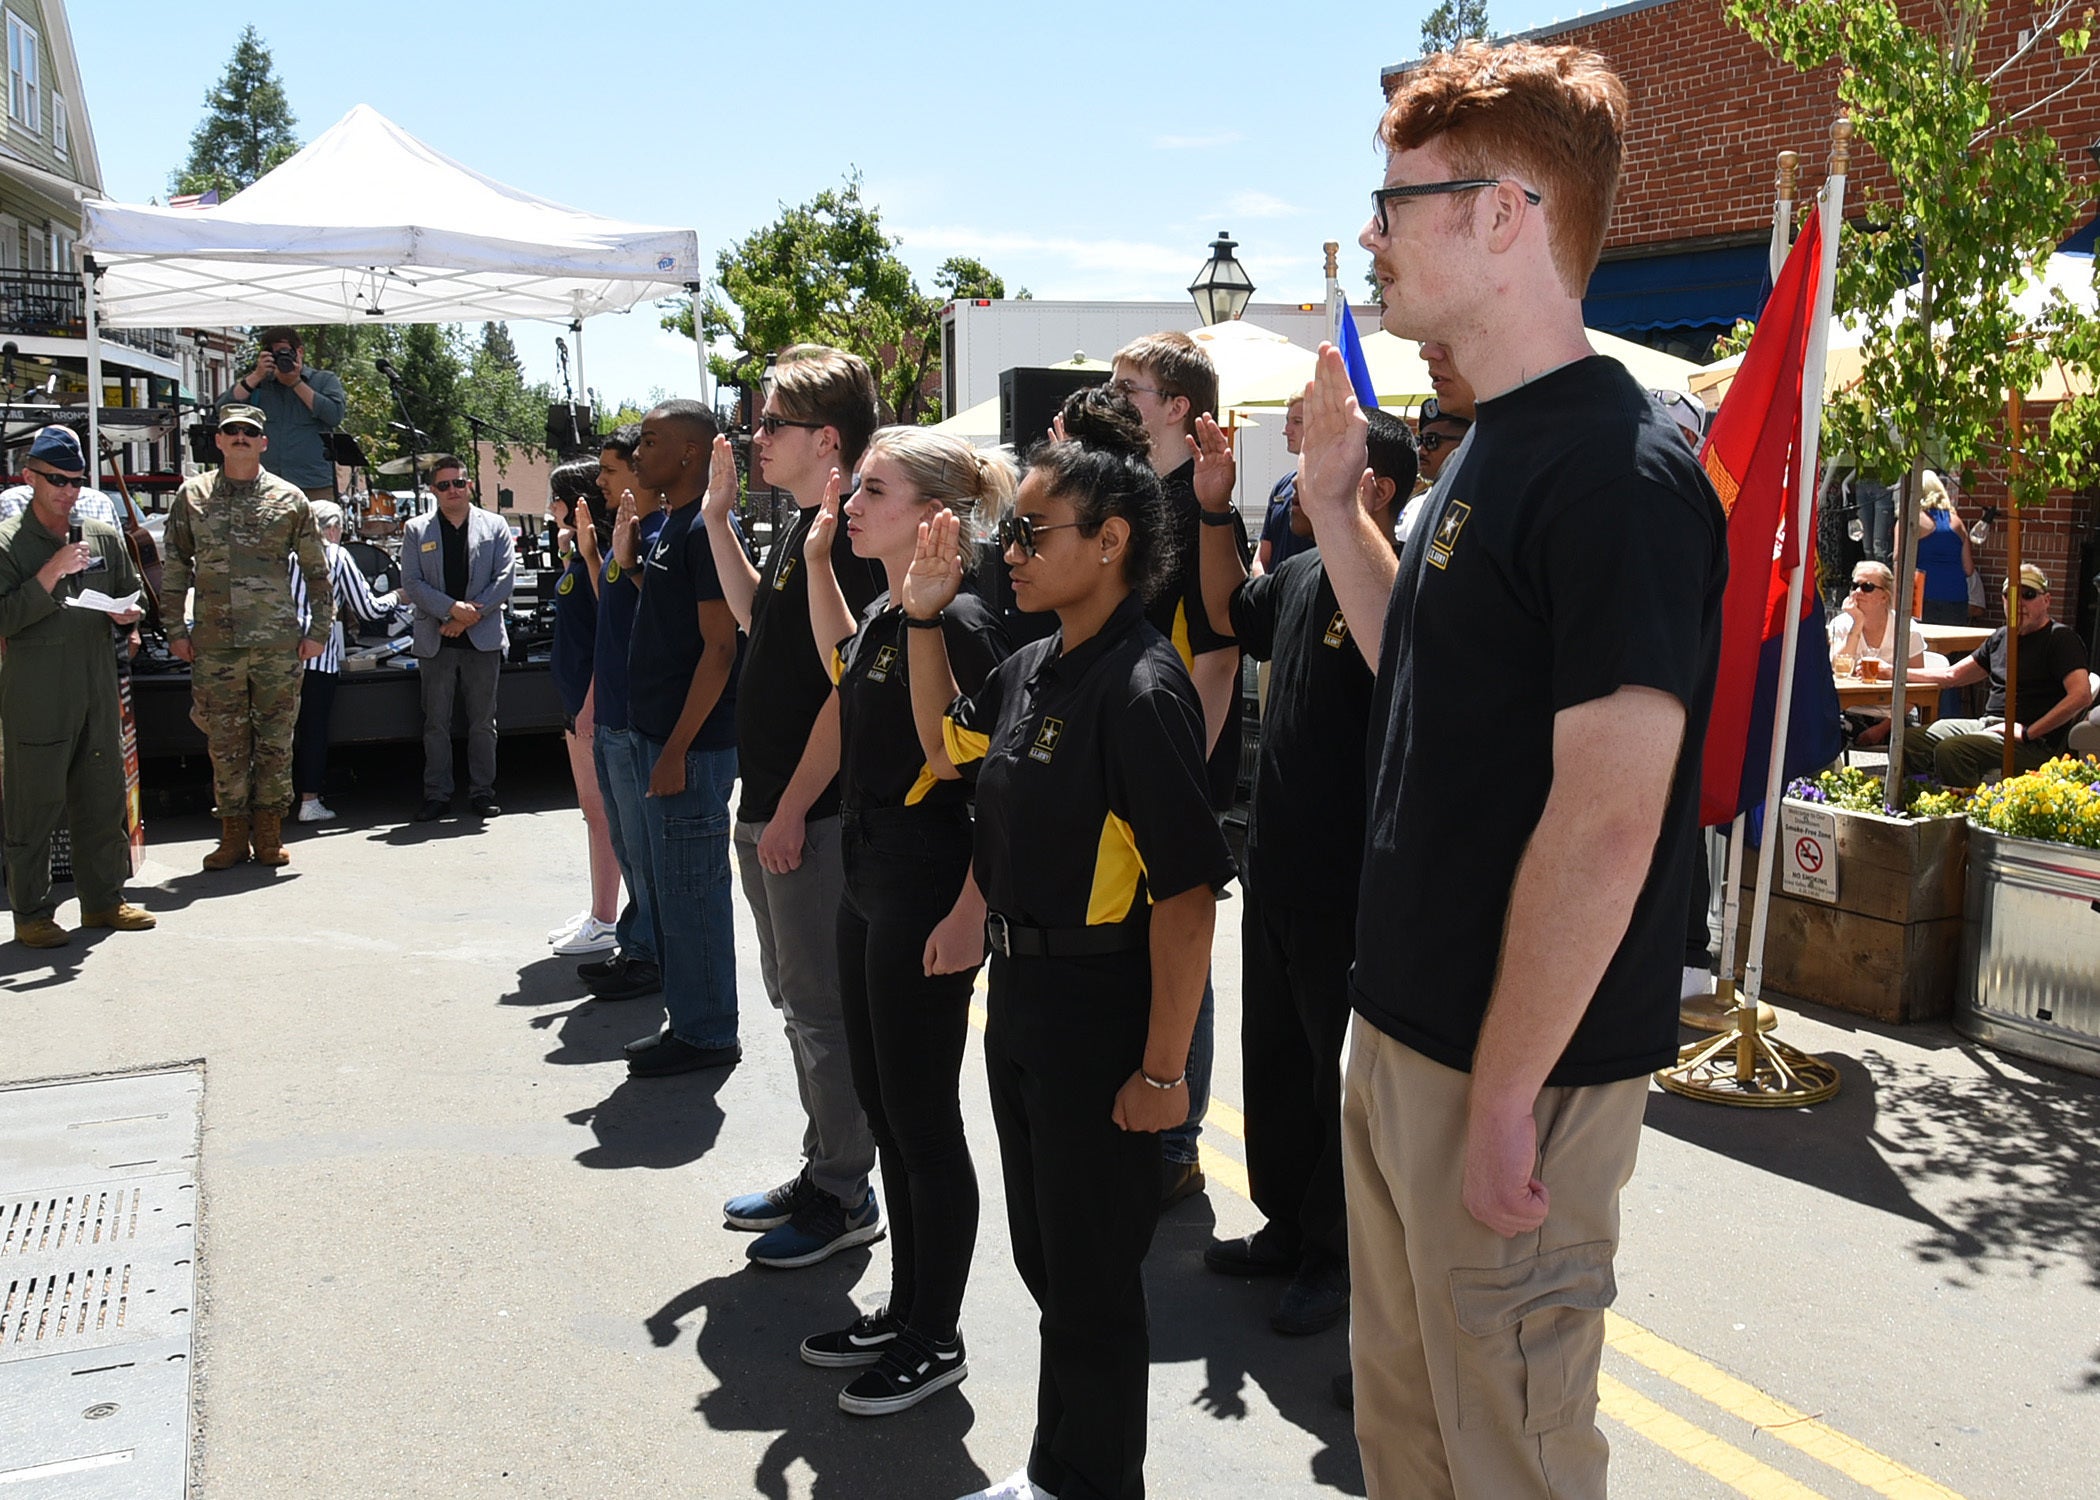 GRASS VALLEY, Calif. - U.S. Army Future Soldiers take an oath of enlistment at the mainstage of the GV Armed Forces Day to show their commitment to the U.S. Army. GV Armed Forces Day celebration was held in honor of the men and women who serve in the U.S. military to include opening ceremony colors, booths from all service branches, music performances, static and vehicle displays in additional to two aerial flyovers.  (U.S. Army photo by Tim Jensen/Released)